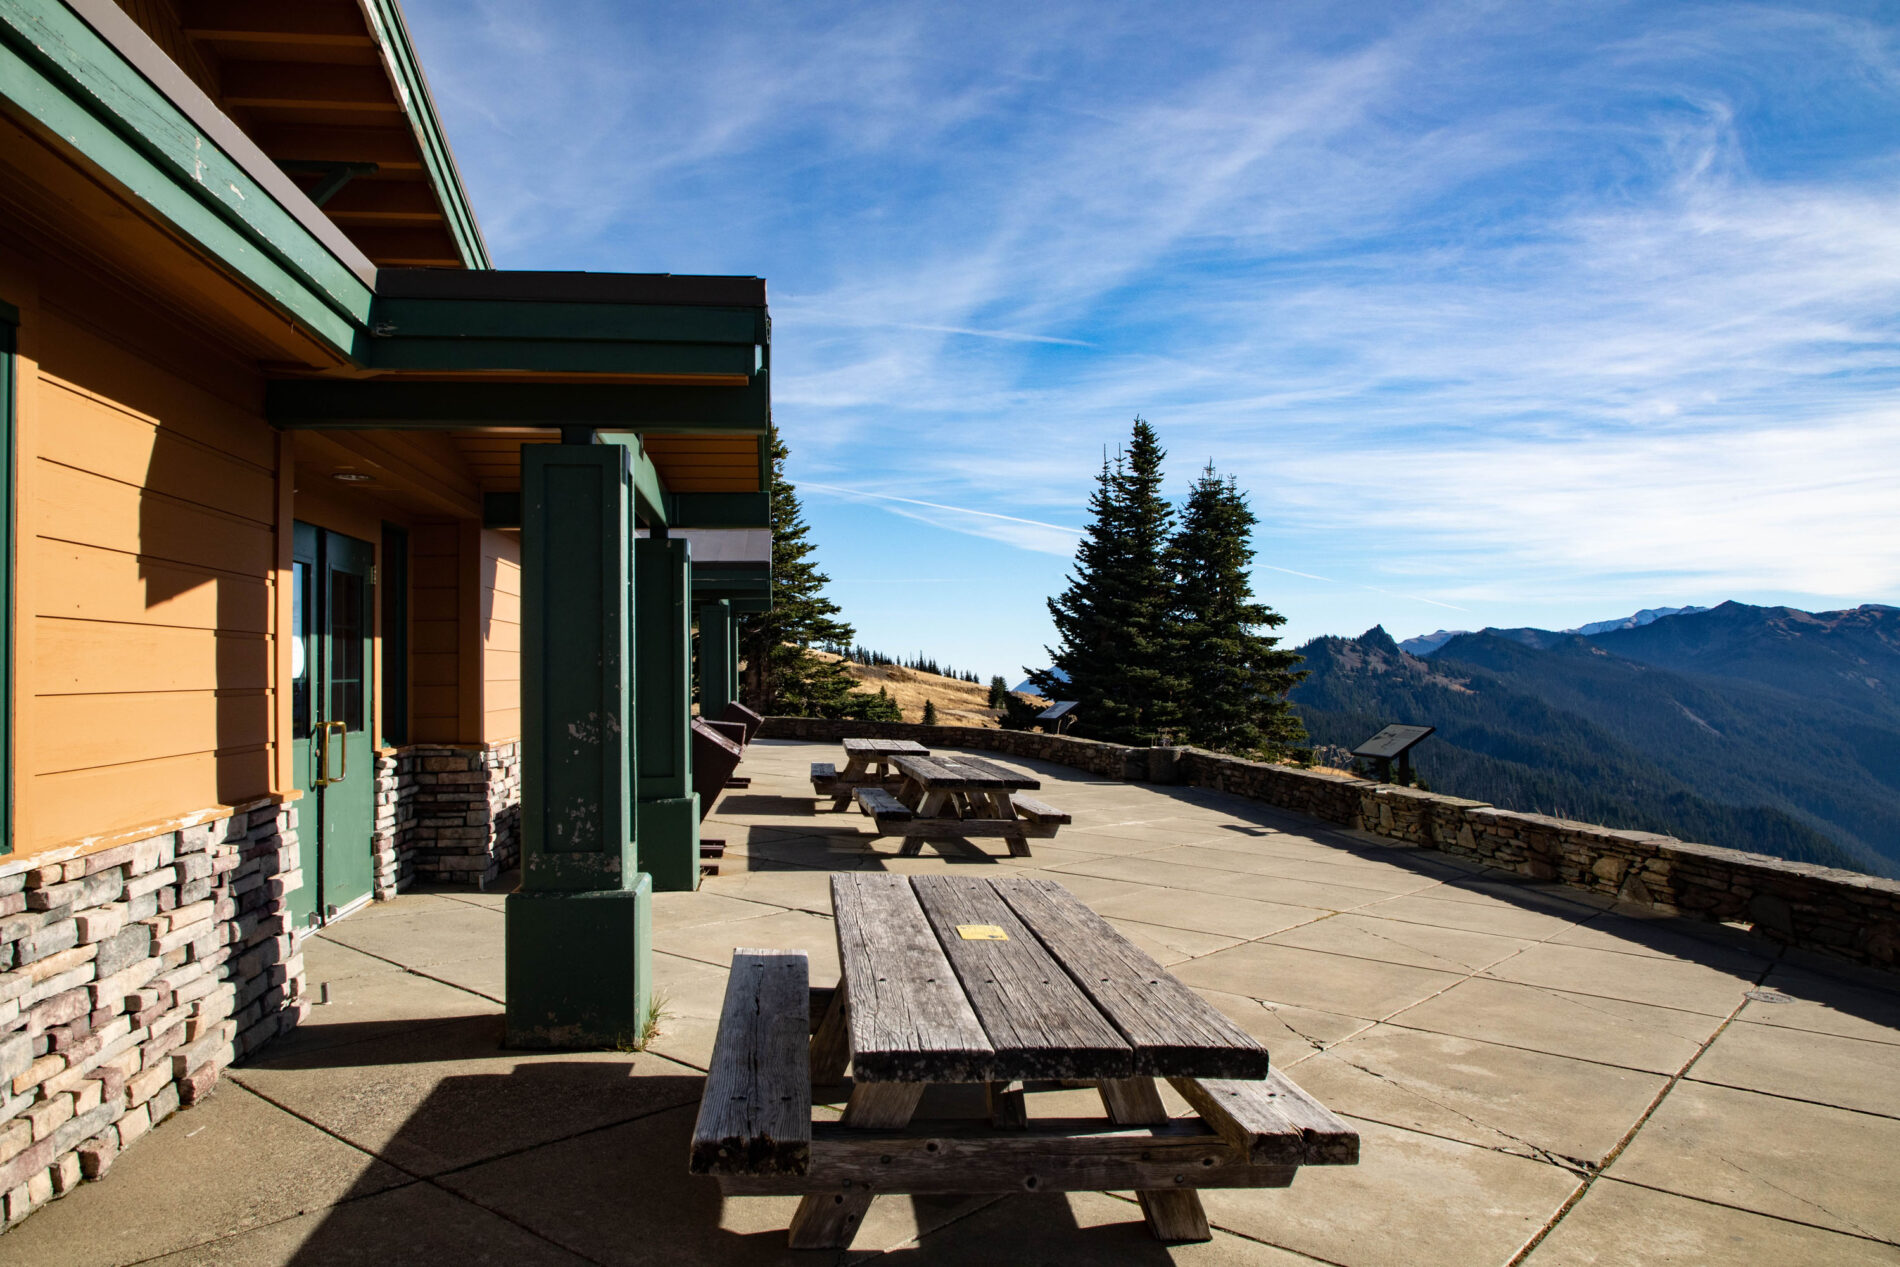 Picnic tables with a view of the mountains at Hurricane Ridge visitor center.